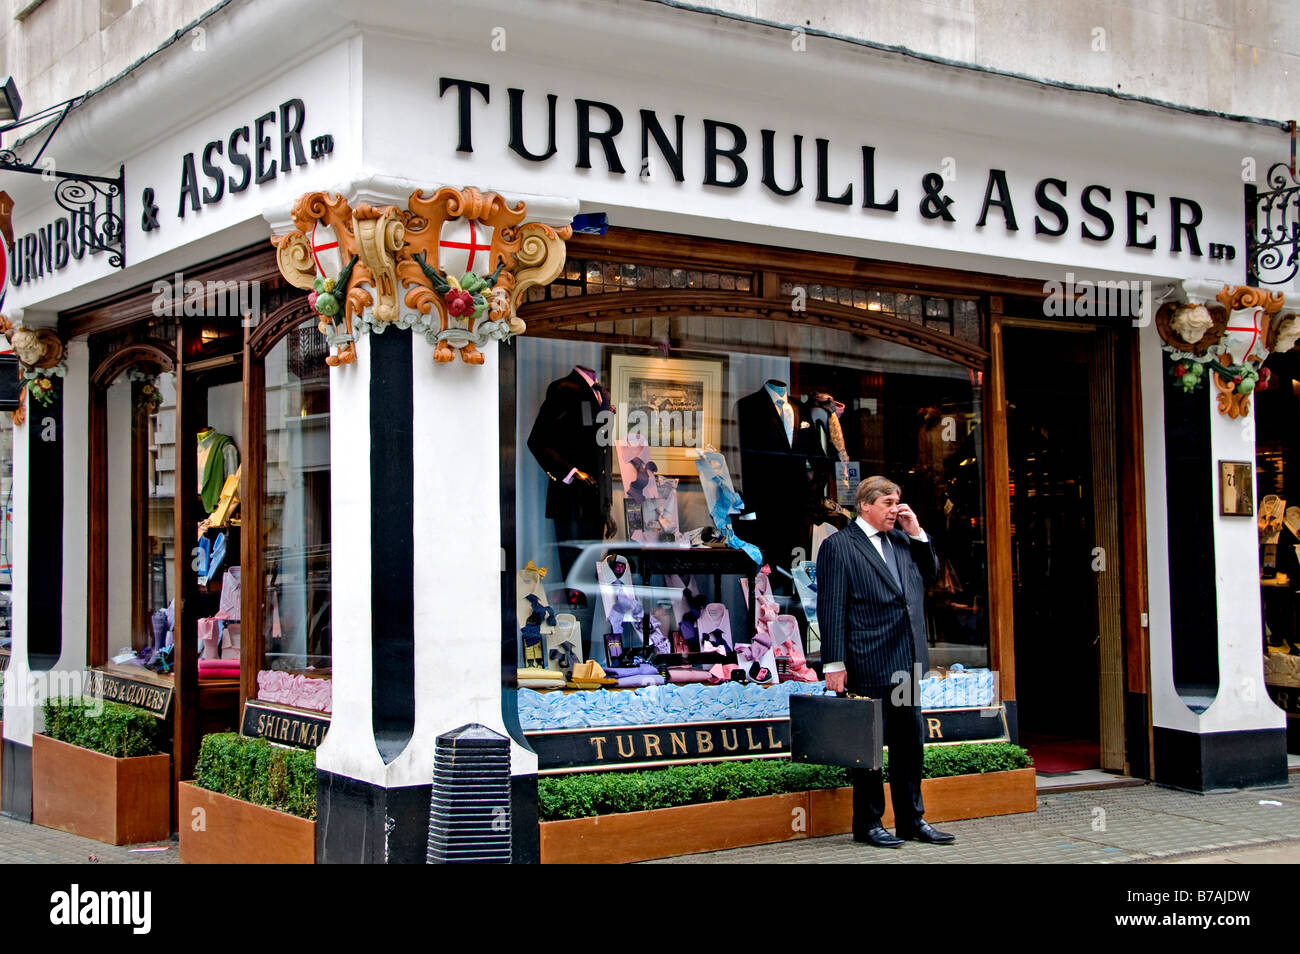 Turnbull & Asser The Piccadilly Arcade runs between Piccadilly and Jermyn Street in central London. Stock Photo